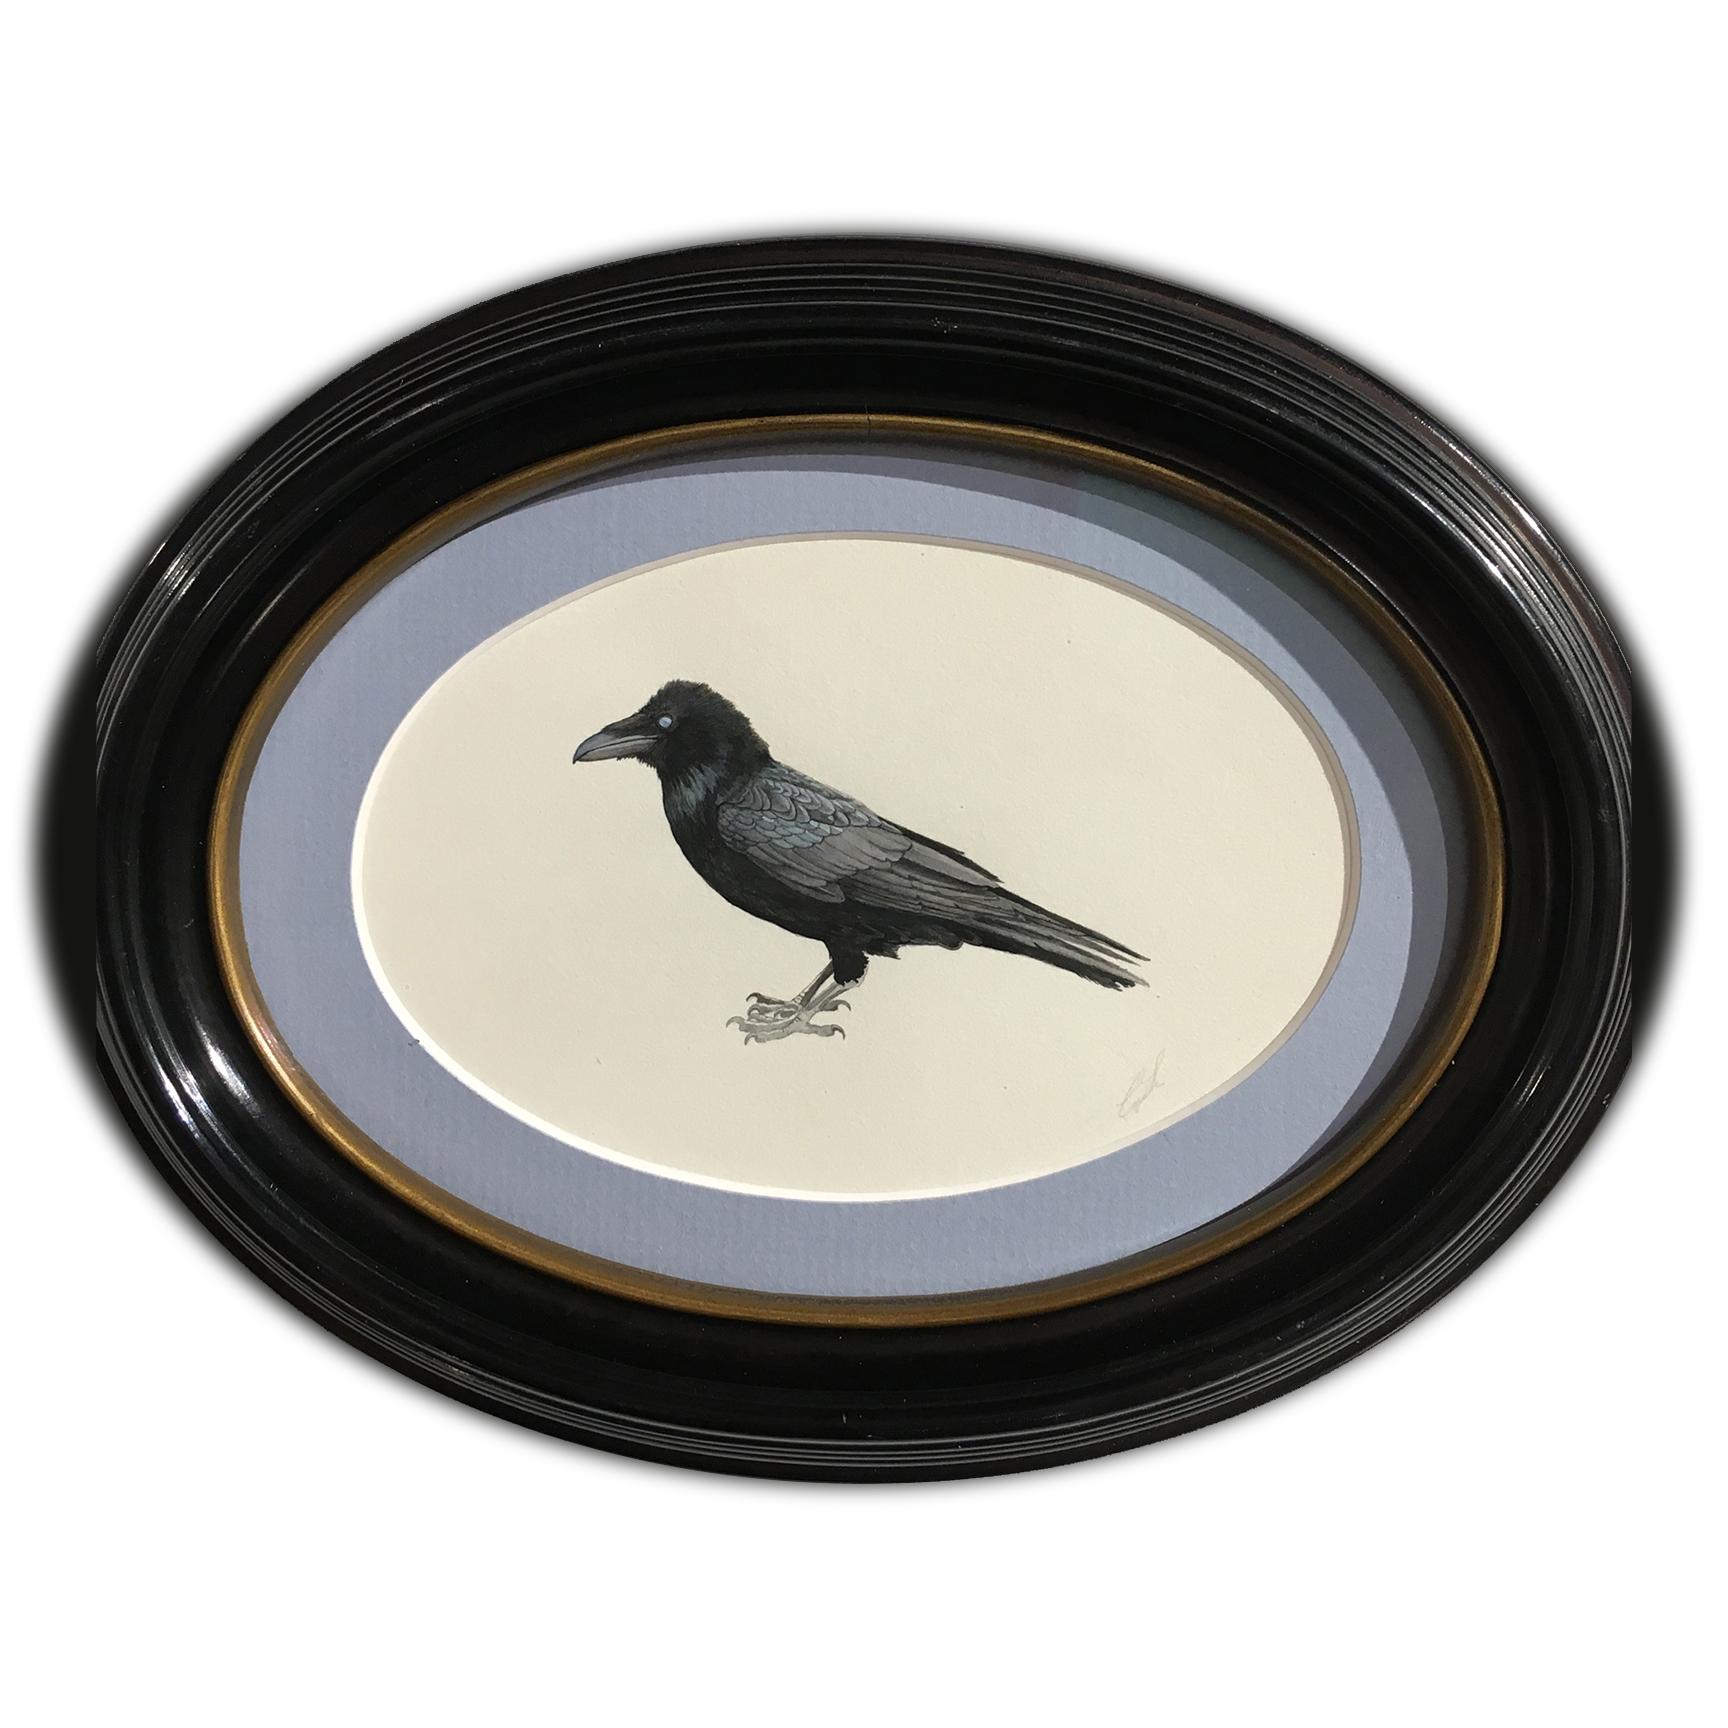 Cynthia Large Animal Painting - Zombie Raven II - Highly Detailed Watercolor Painting in Oval Frame